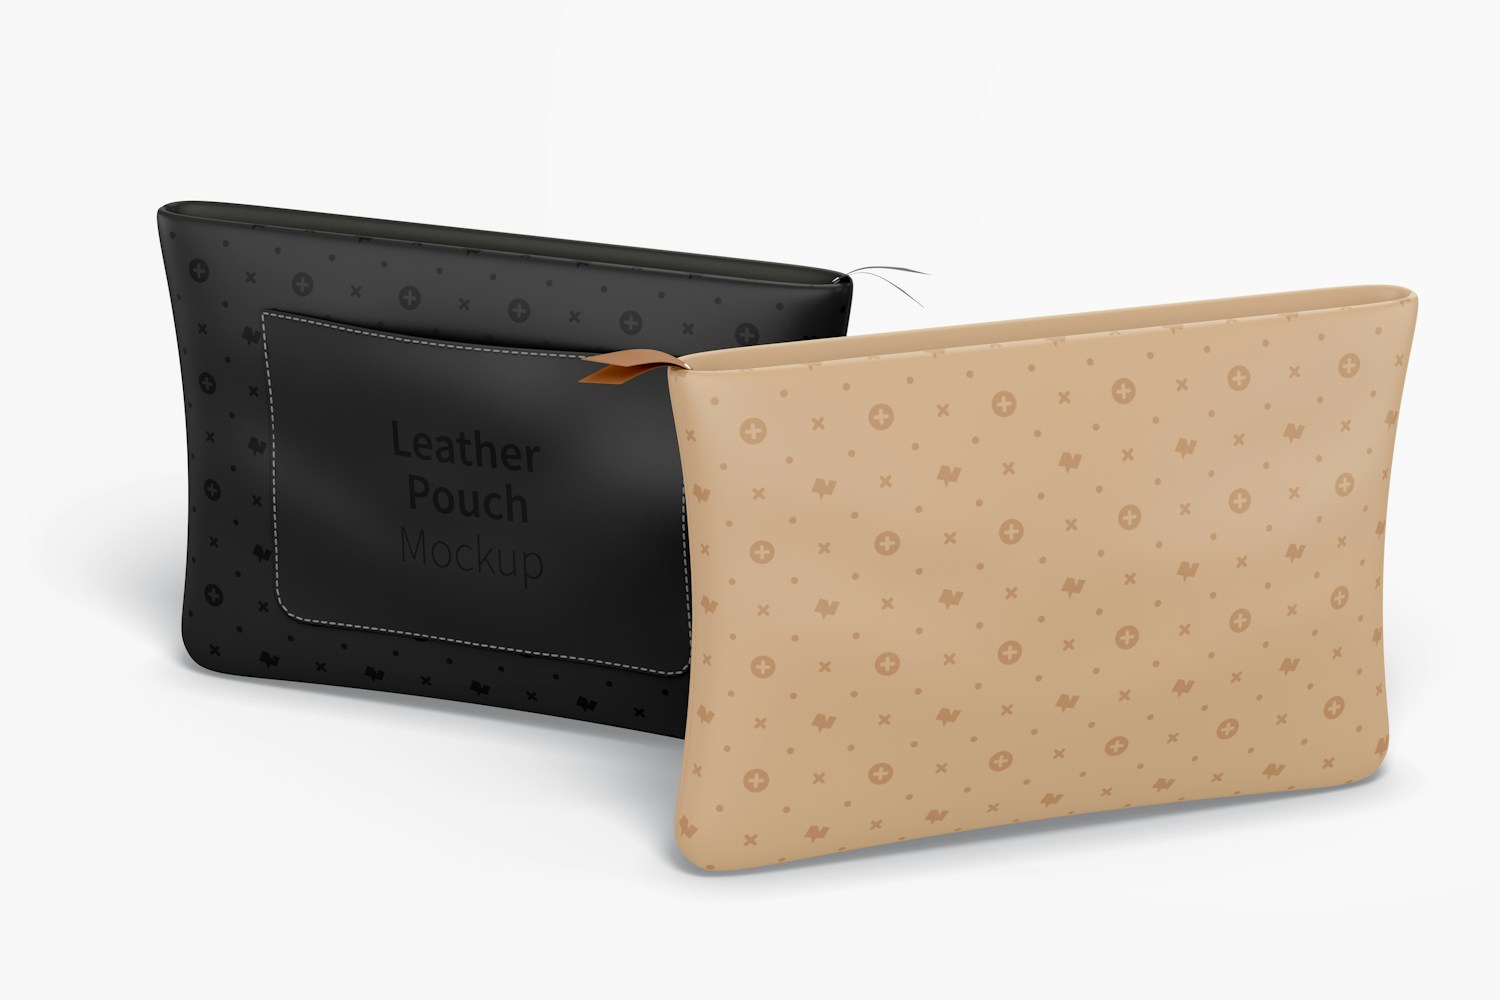 Leather Pouch Mockup